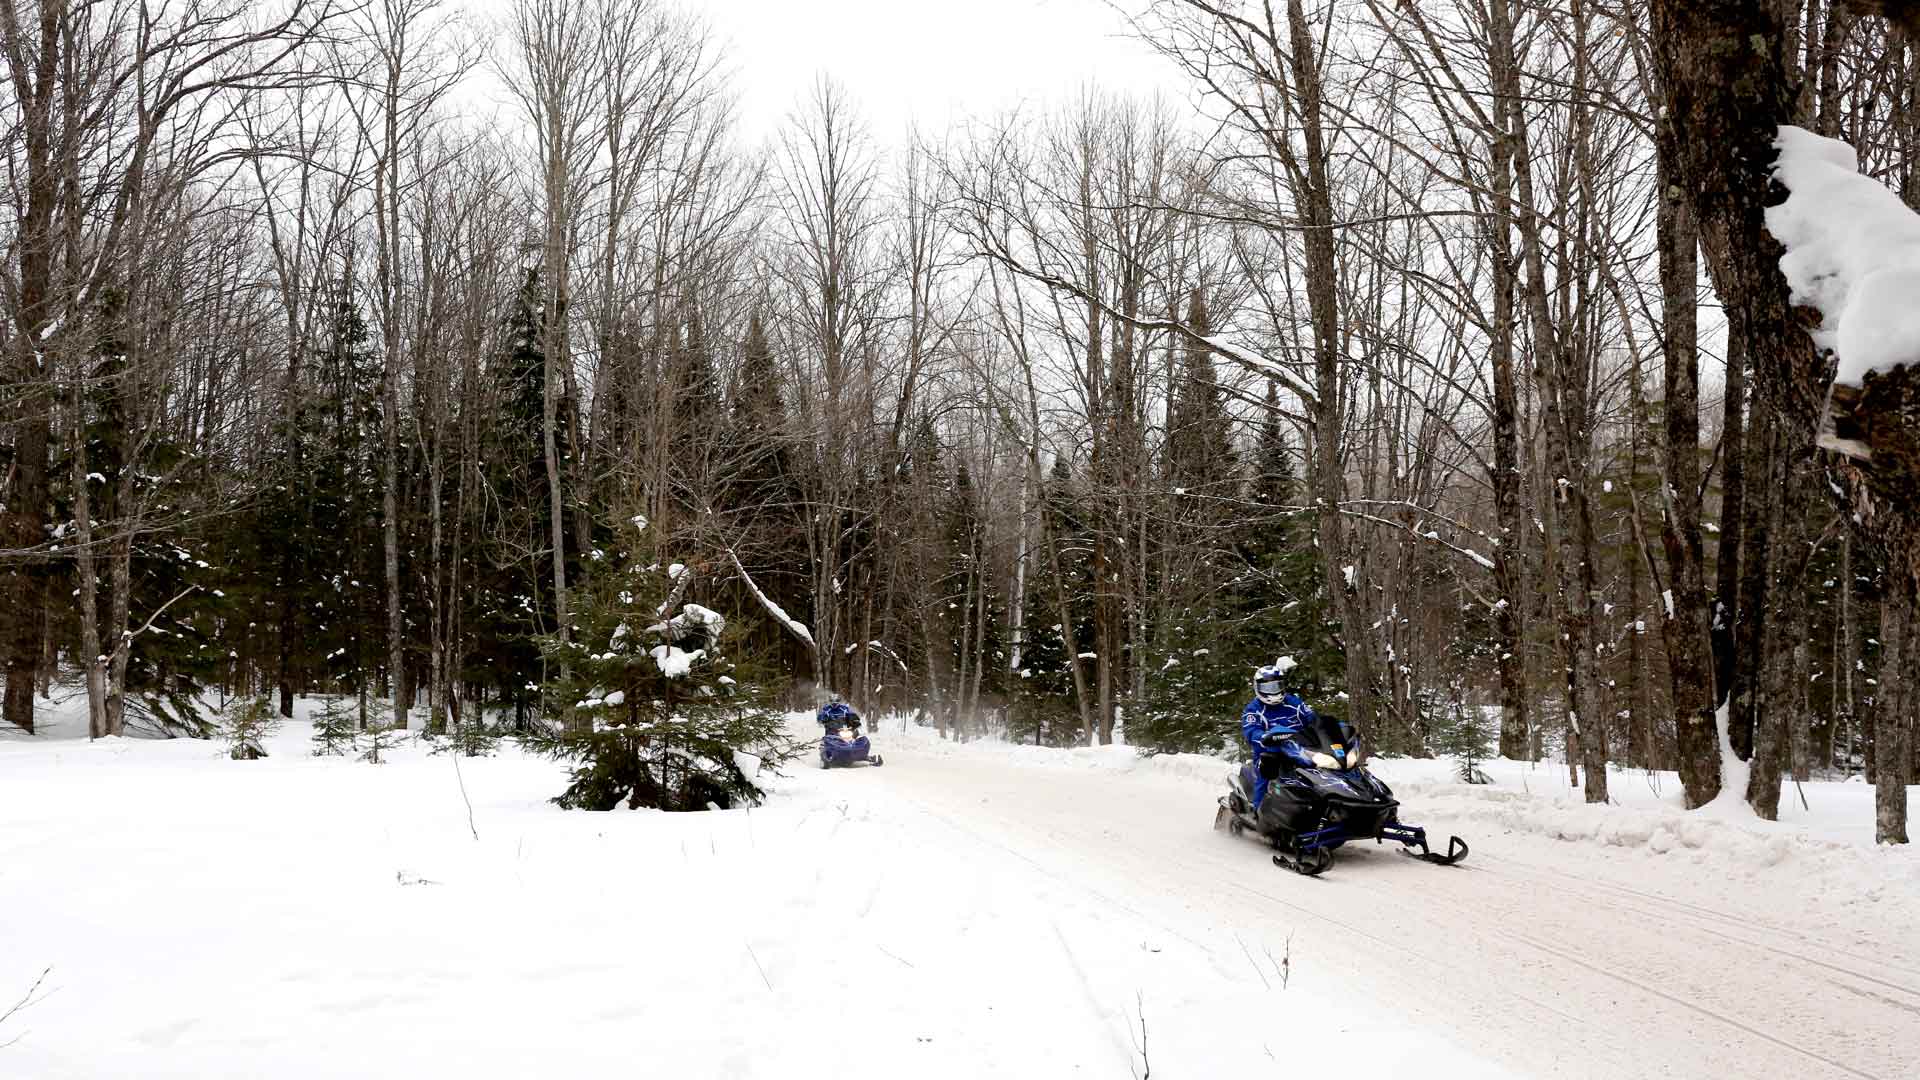 Snowmobilers riding through forest of Conover Sno-Buddies Trails in Vilas County, Wisconsin